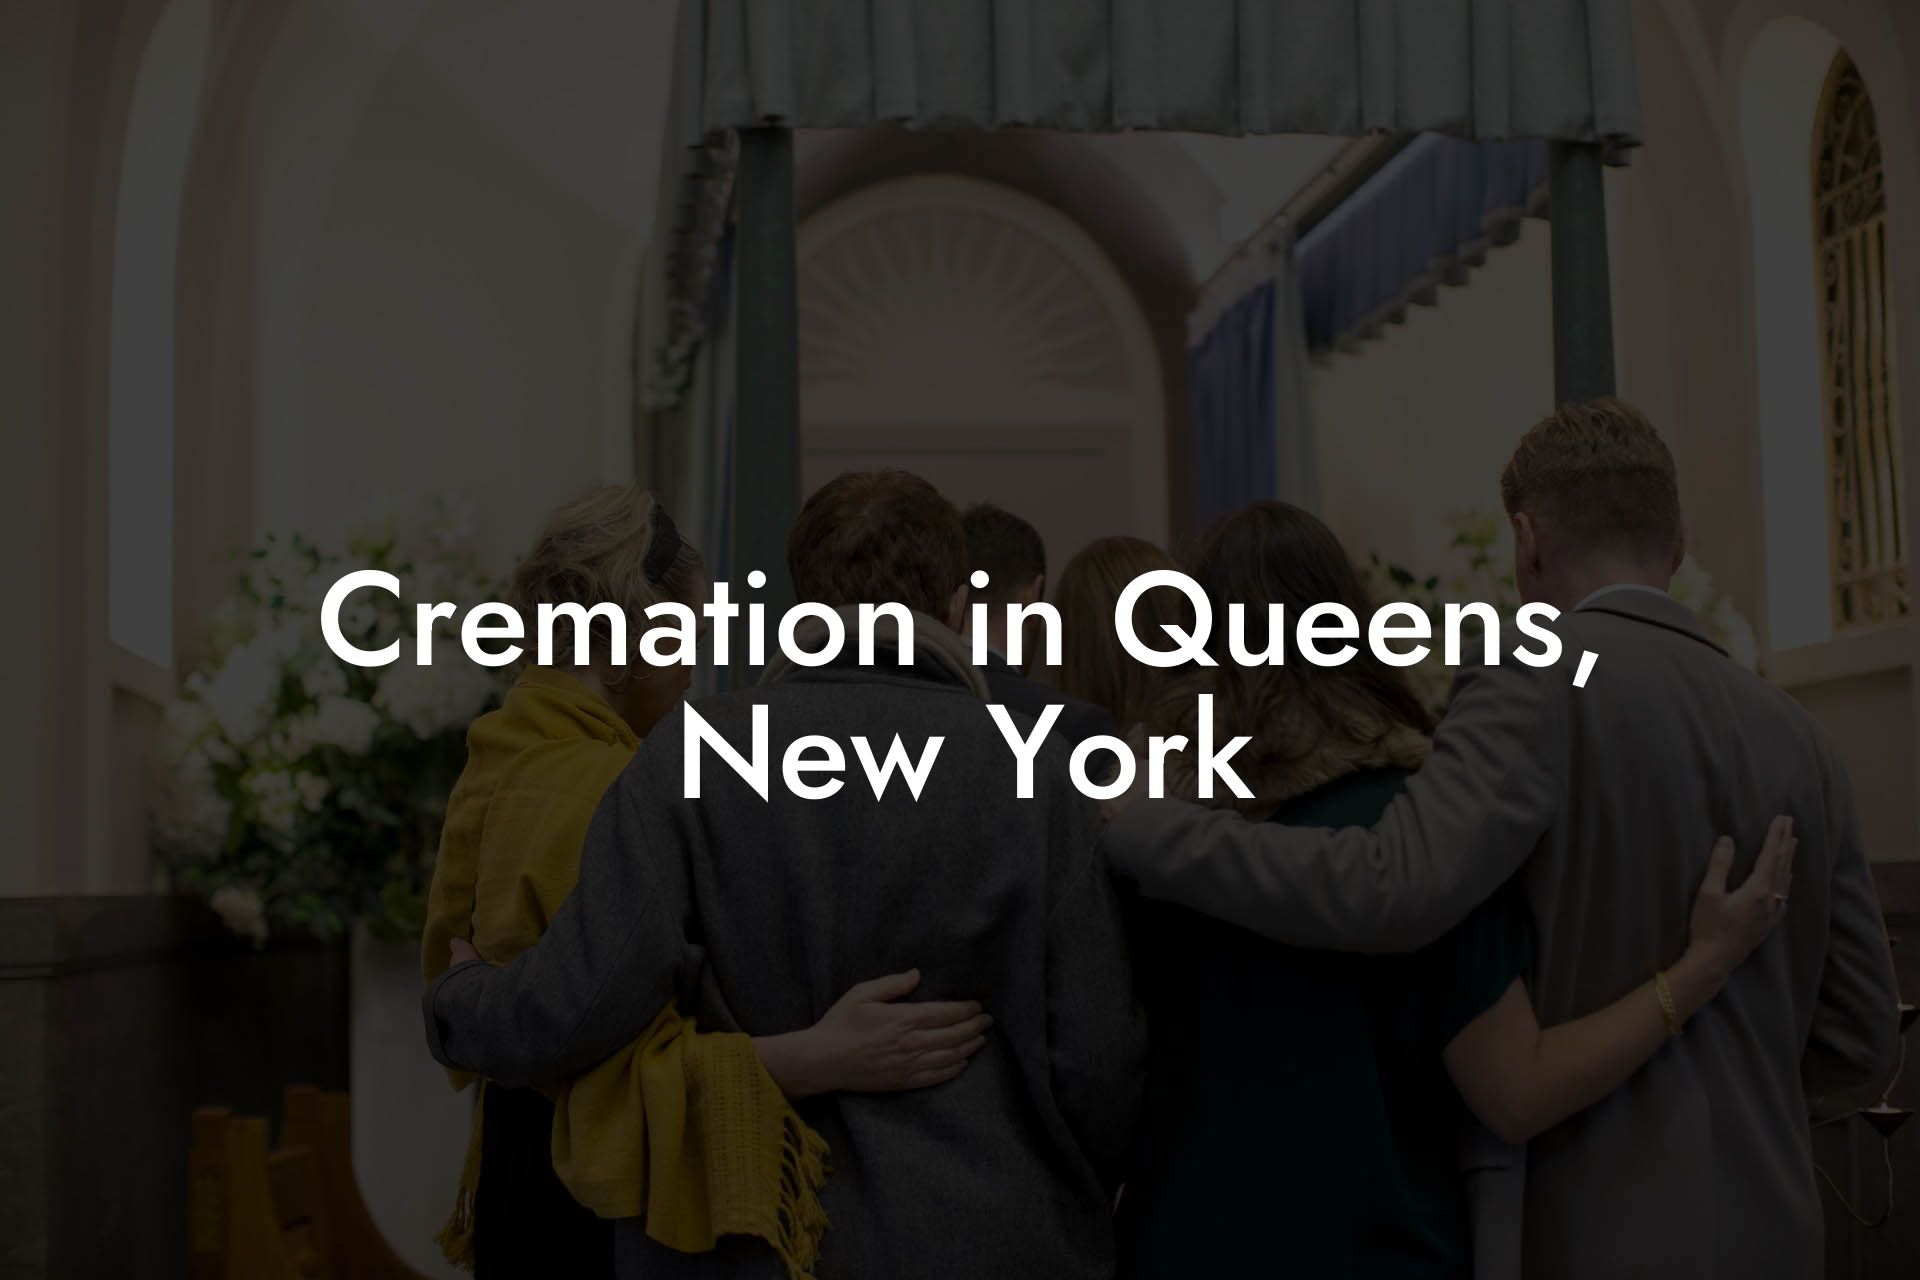 Cremation in Queens, New York